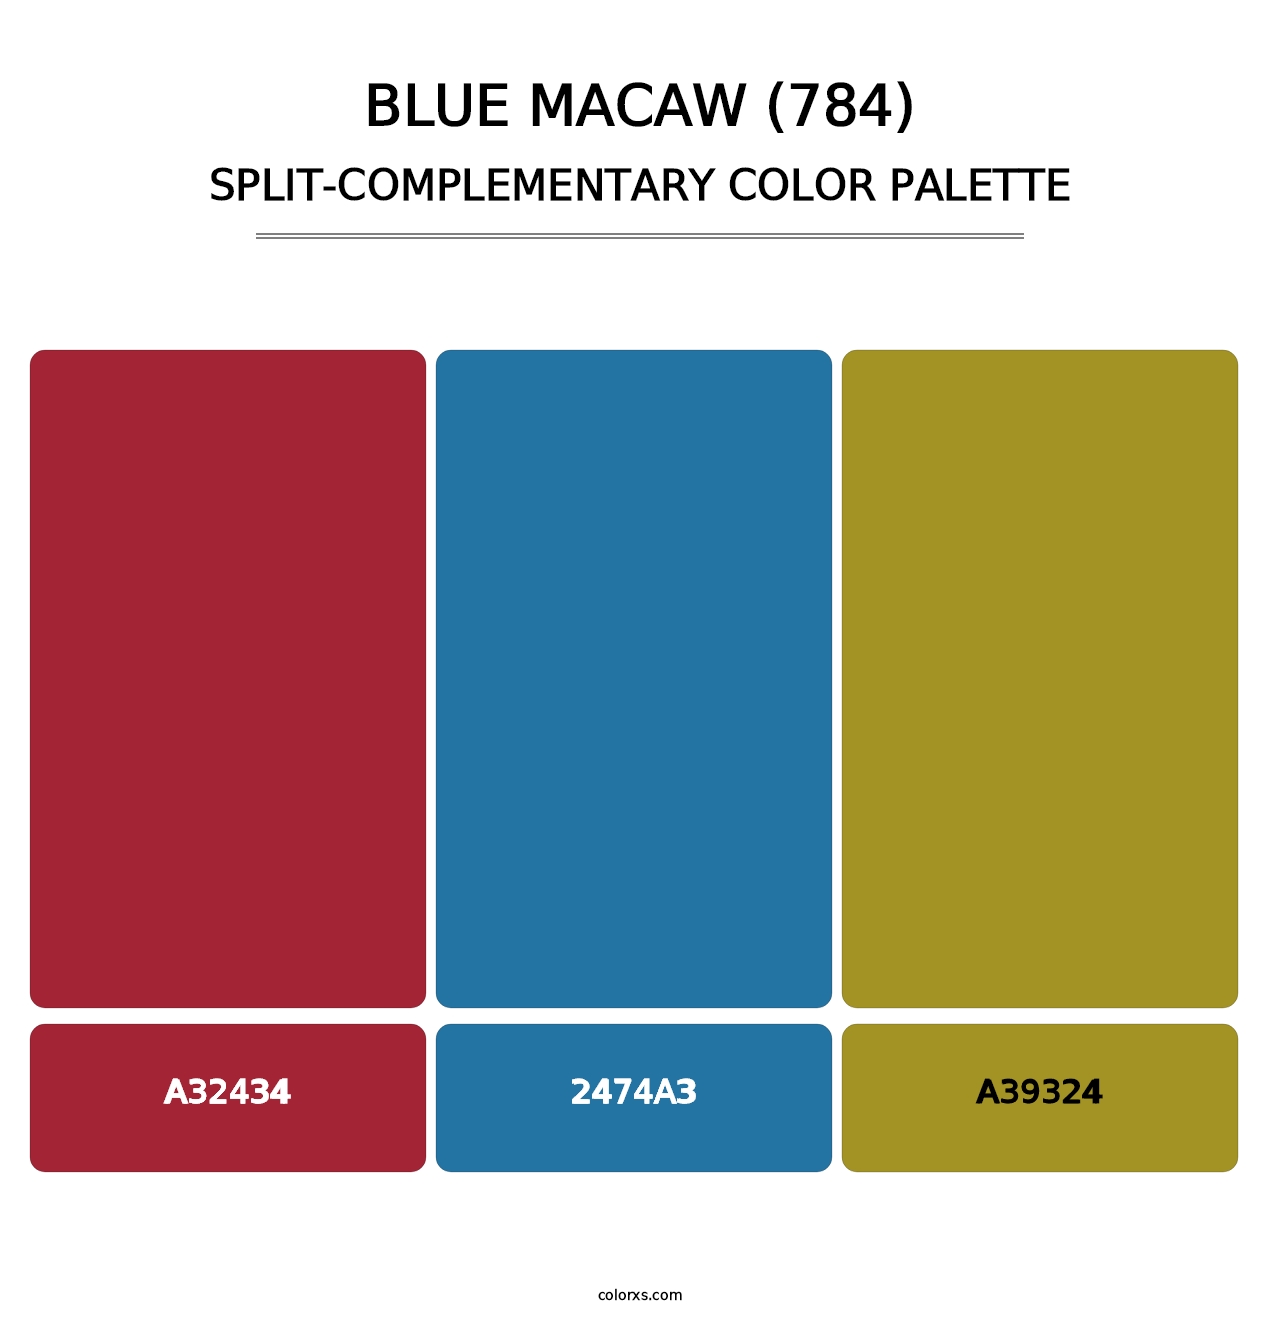 Blue Macaw (784) - Split-Complementary Color Palette